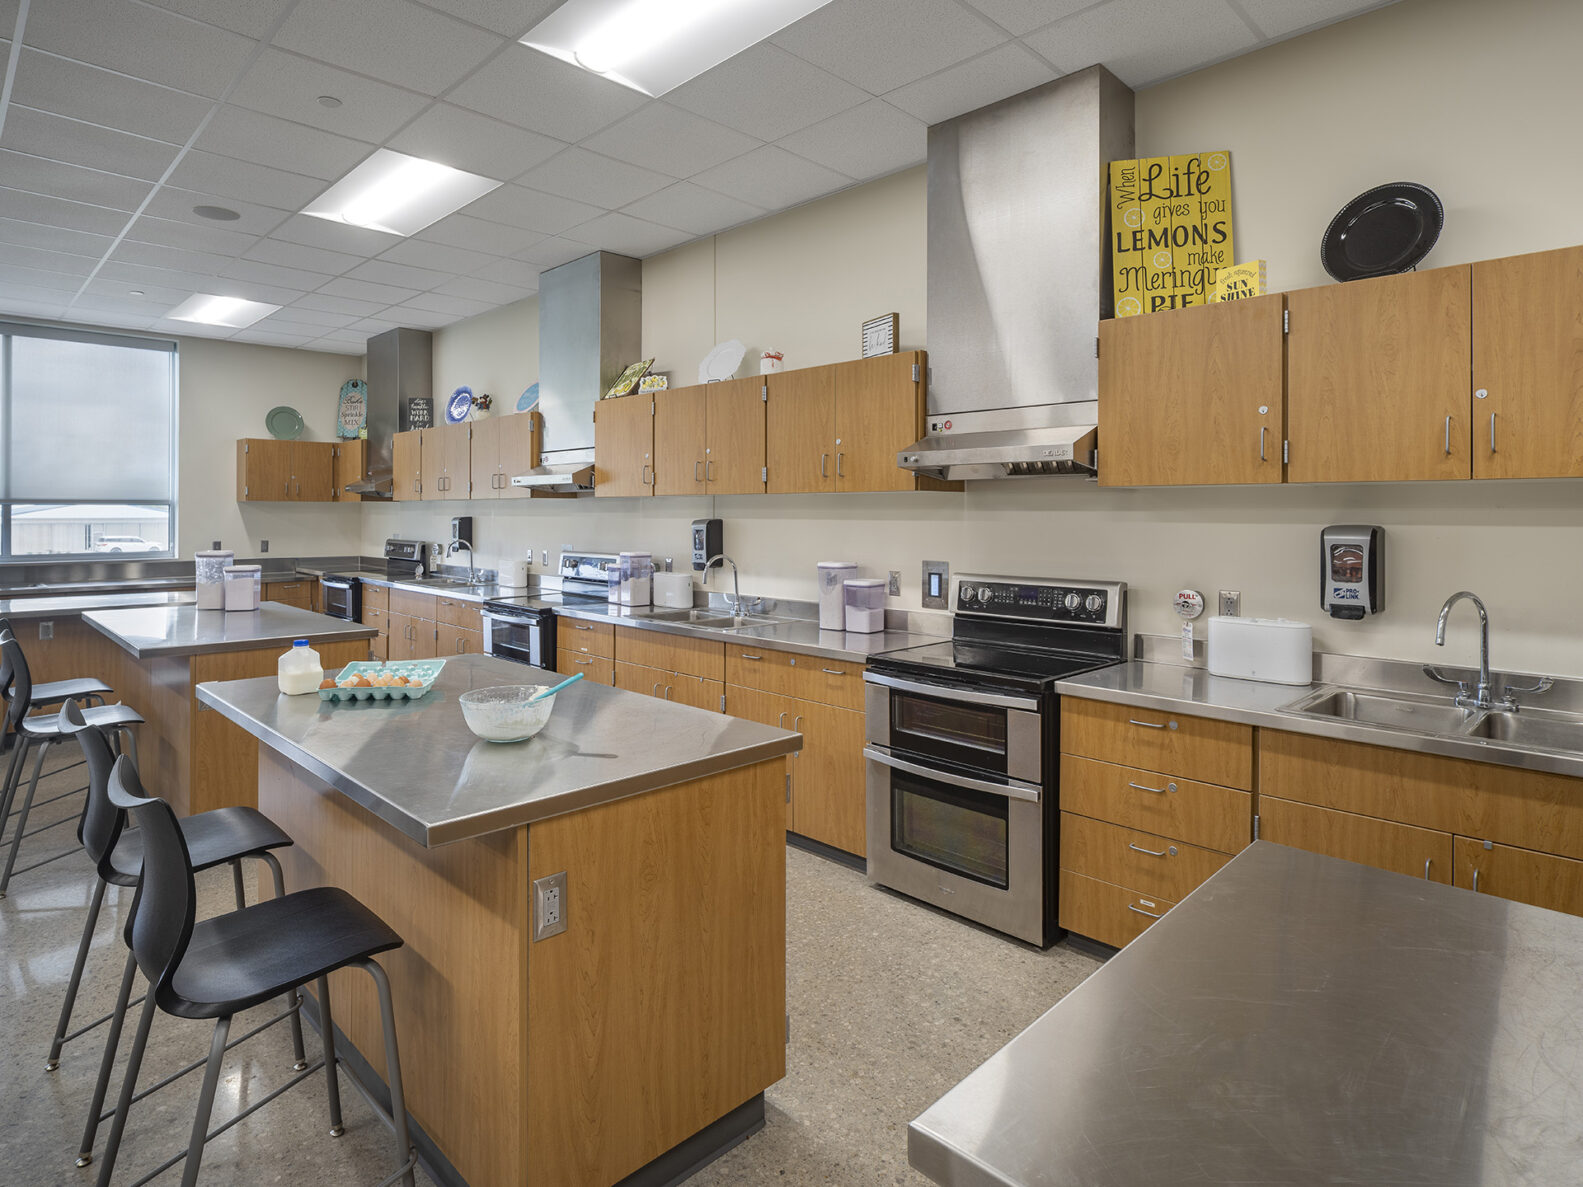 A classroom/kitchen for foods class at Tonganoxie High School, renovated by McCownGordon Construction